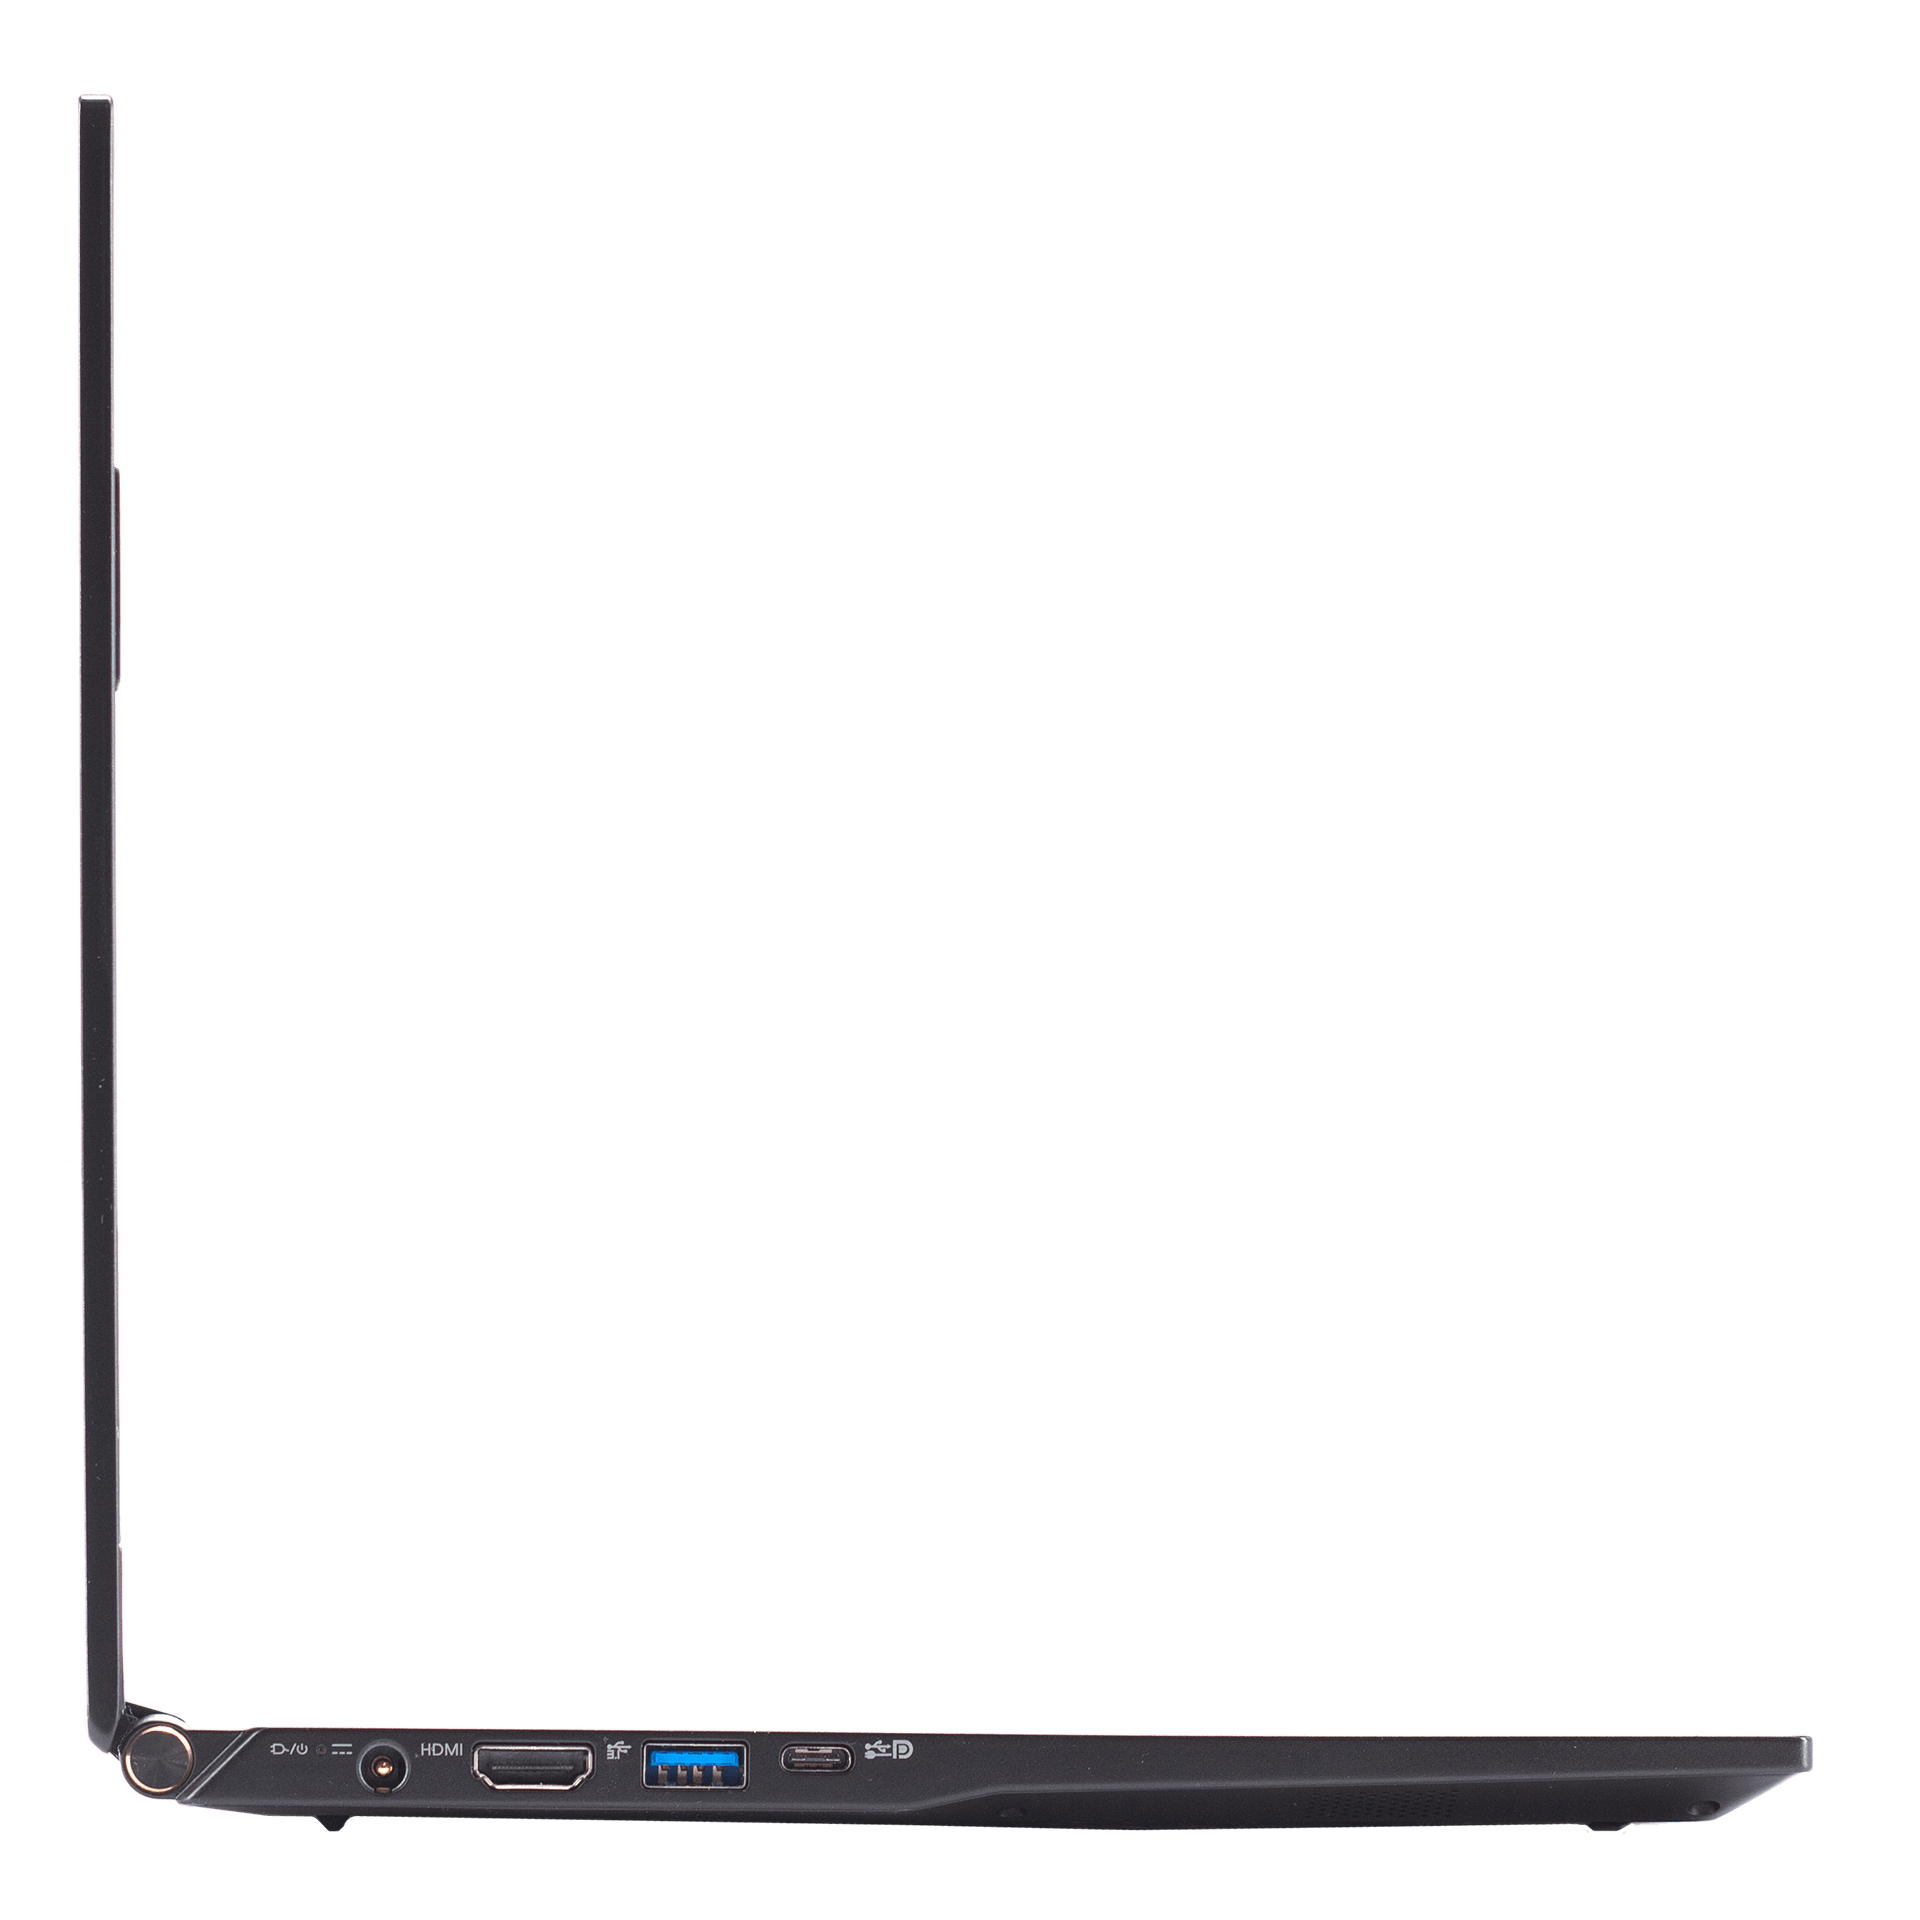 A left profile view of the Lemur Pro laptop’s ports, namely charging port, HDMI, USB, and USB-C.